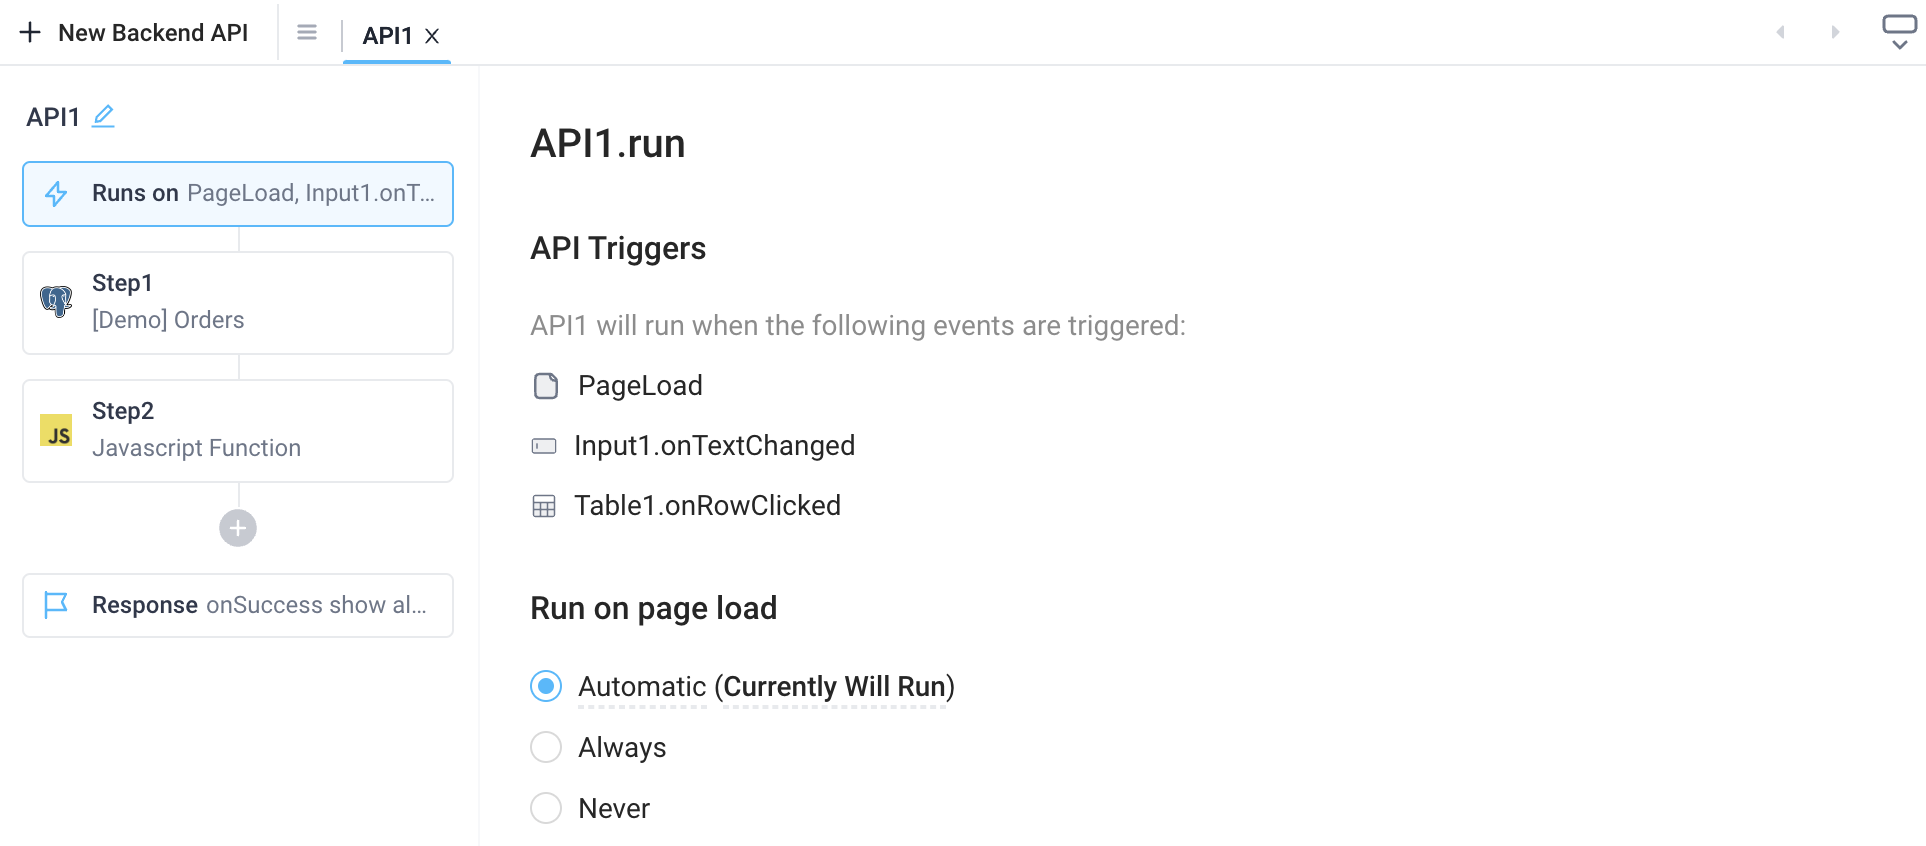 The list of API triggers and the Page Load settings of a backend API